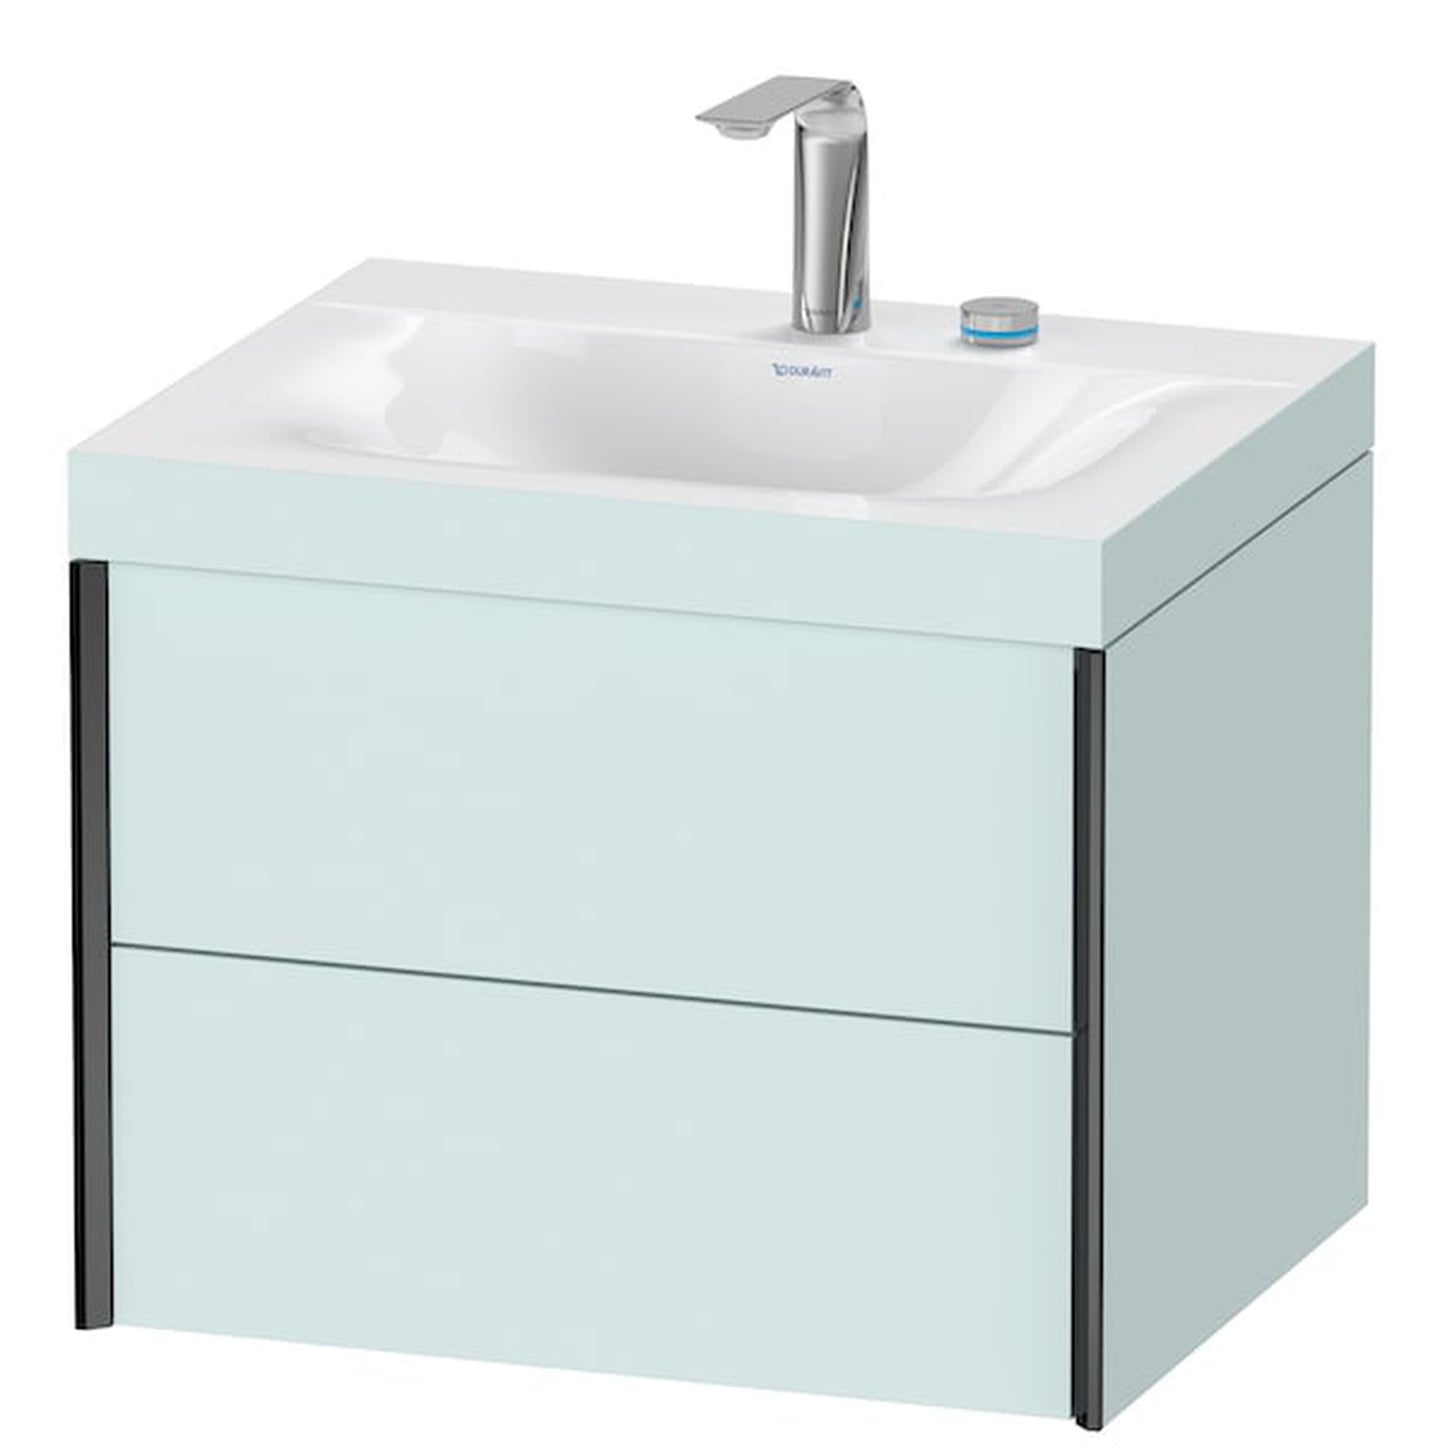 Duravit Xviu 24" x 20" x 19" Two Drawer C-Bonded Wall-Mount Vanity Kit With Two Tap Holes, Light Blue (XV4614EB209C)